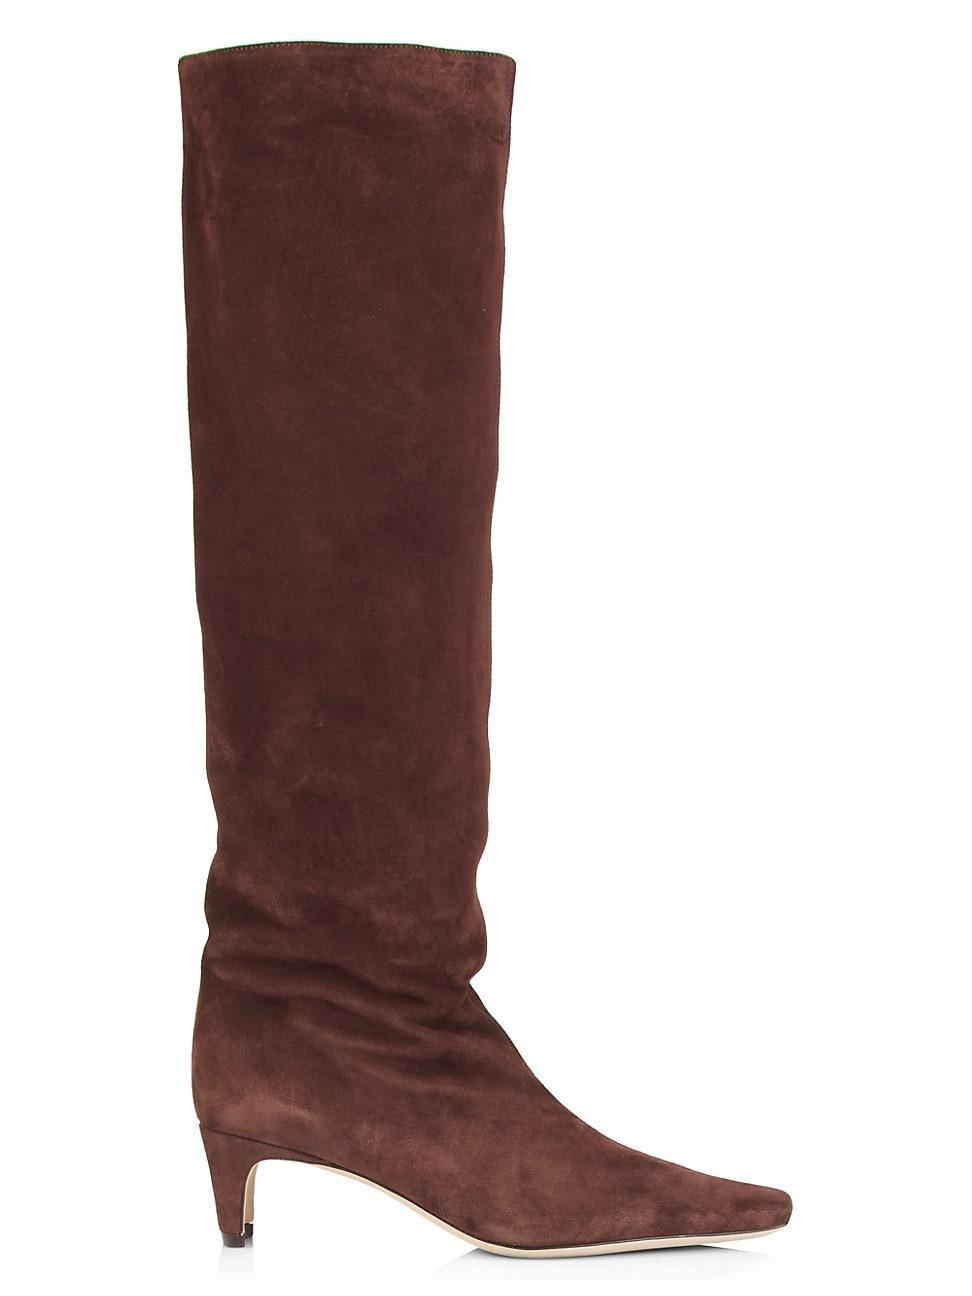 Womens Wally Suede Knee-High Boots Product Image